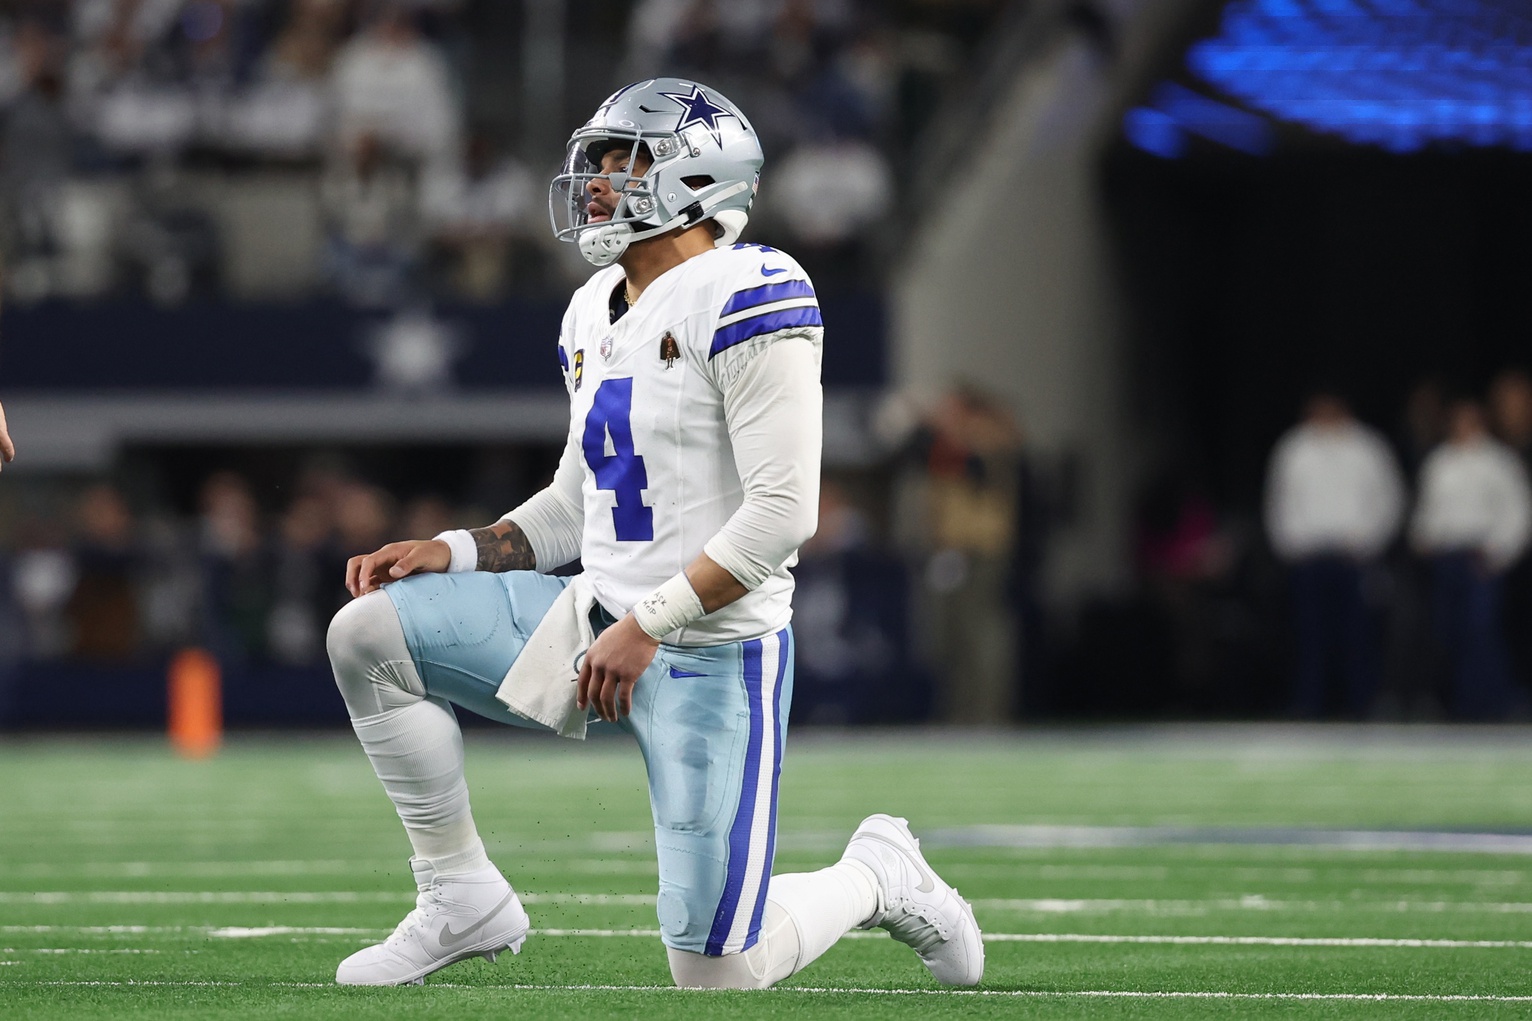 Dak Prescott and the Dallas Cowboys were destroyed by the Green Bay Packers, 48-32, in Sunday's NFC wild-card game.